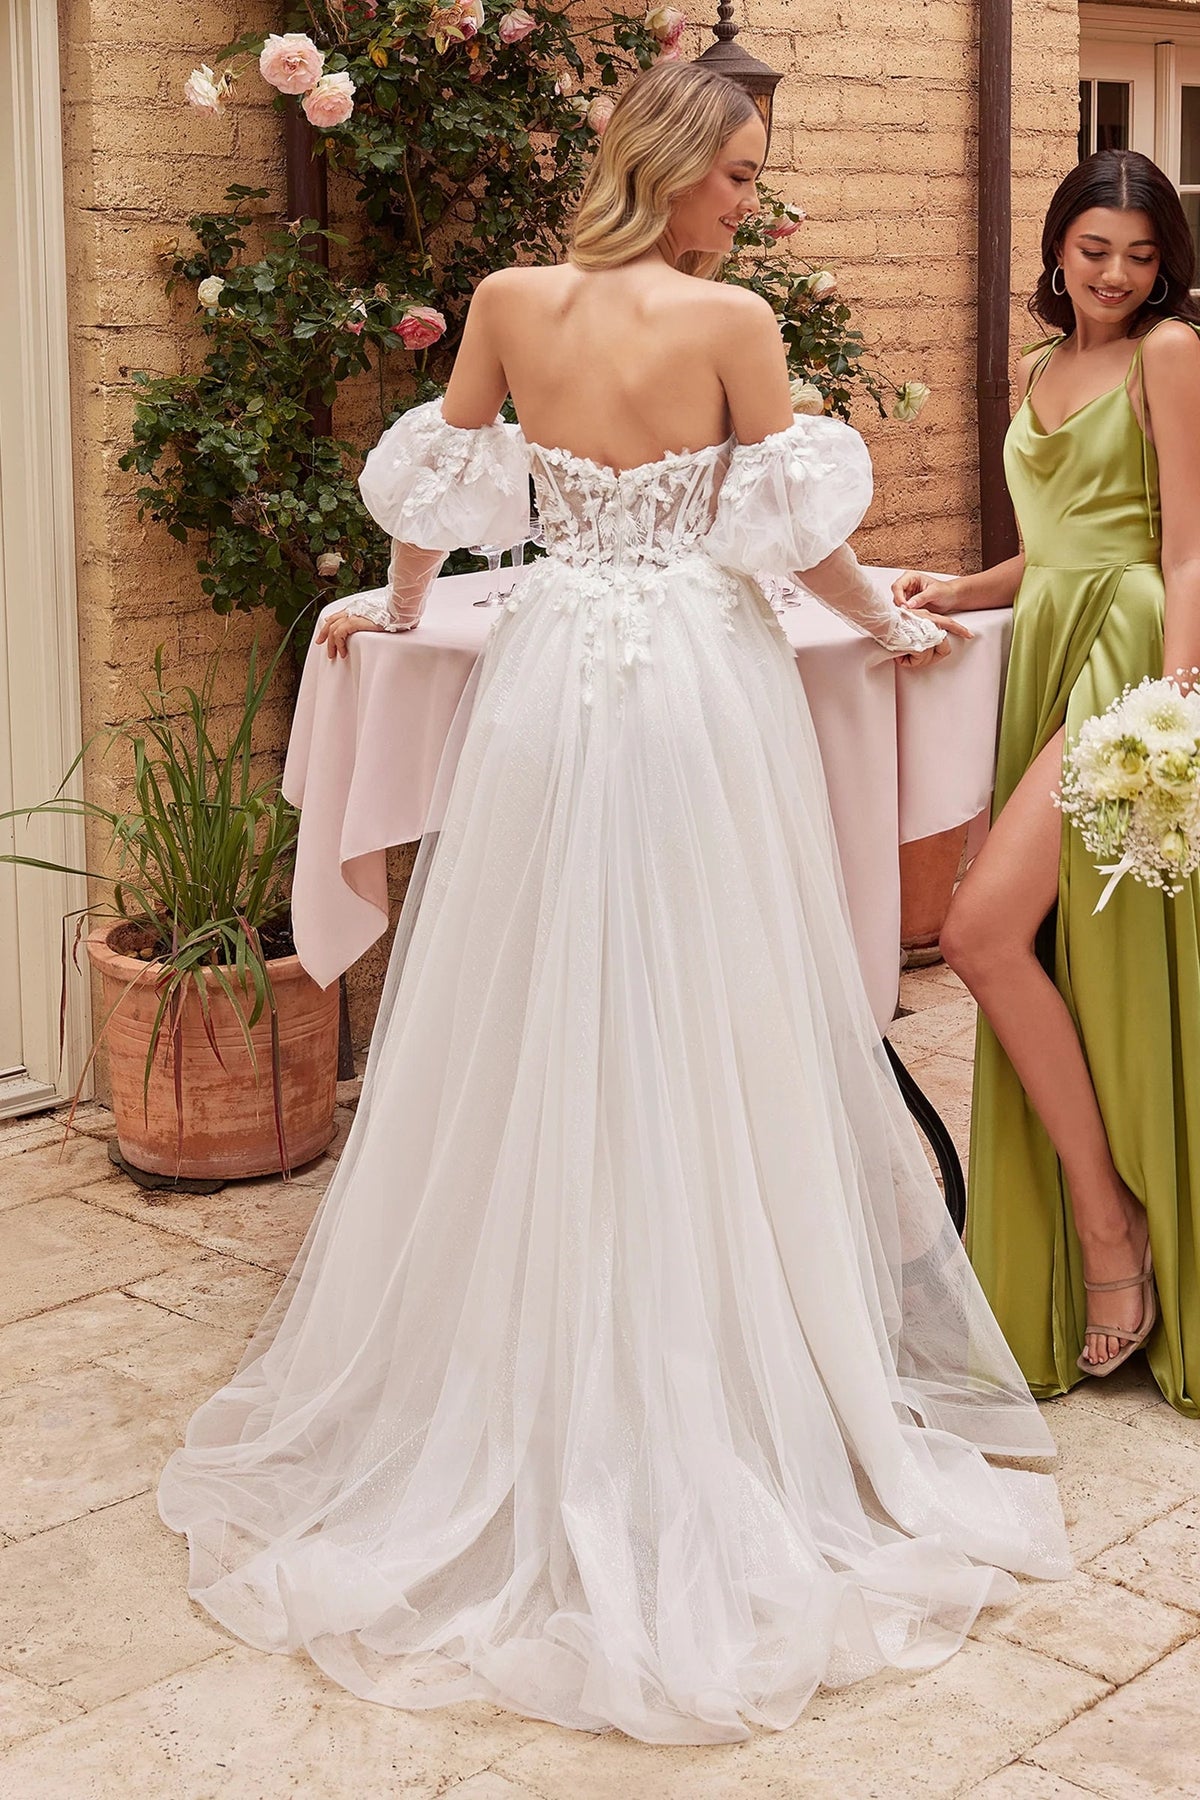 Romantic Aline Wedding Dress 3D Lace Appliques Classic Silhouette Bridal Gown Side Slit Modern Style Strapless Sweetheart Plunge Neckline